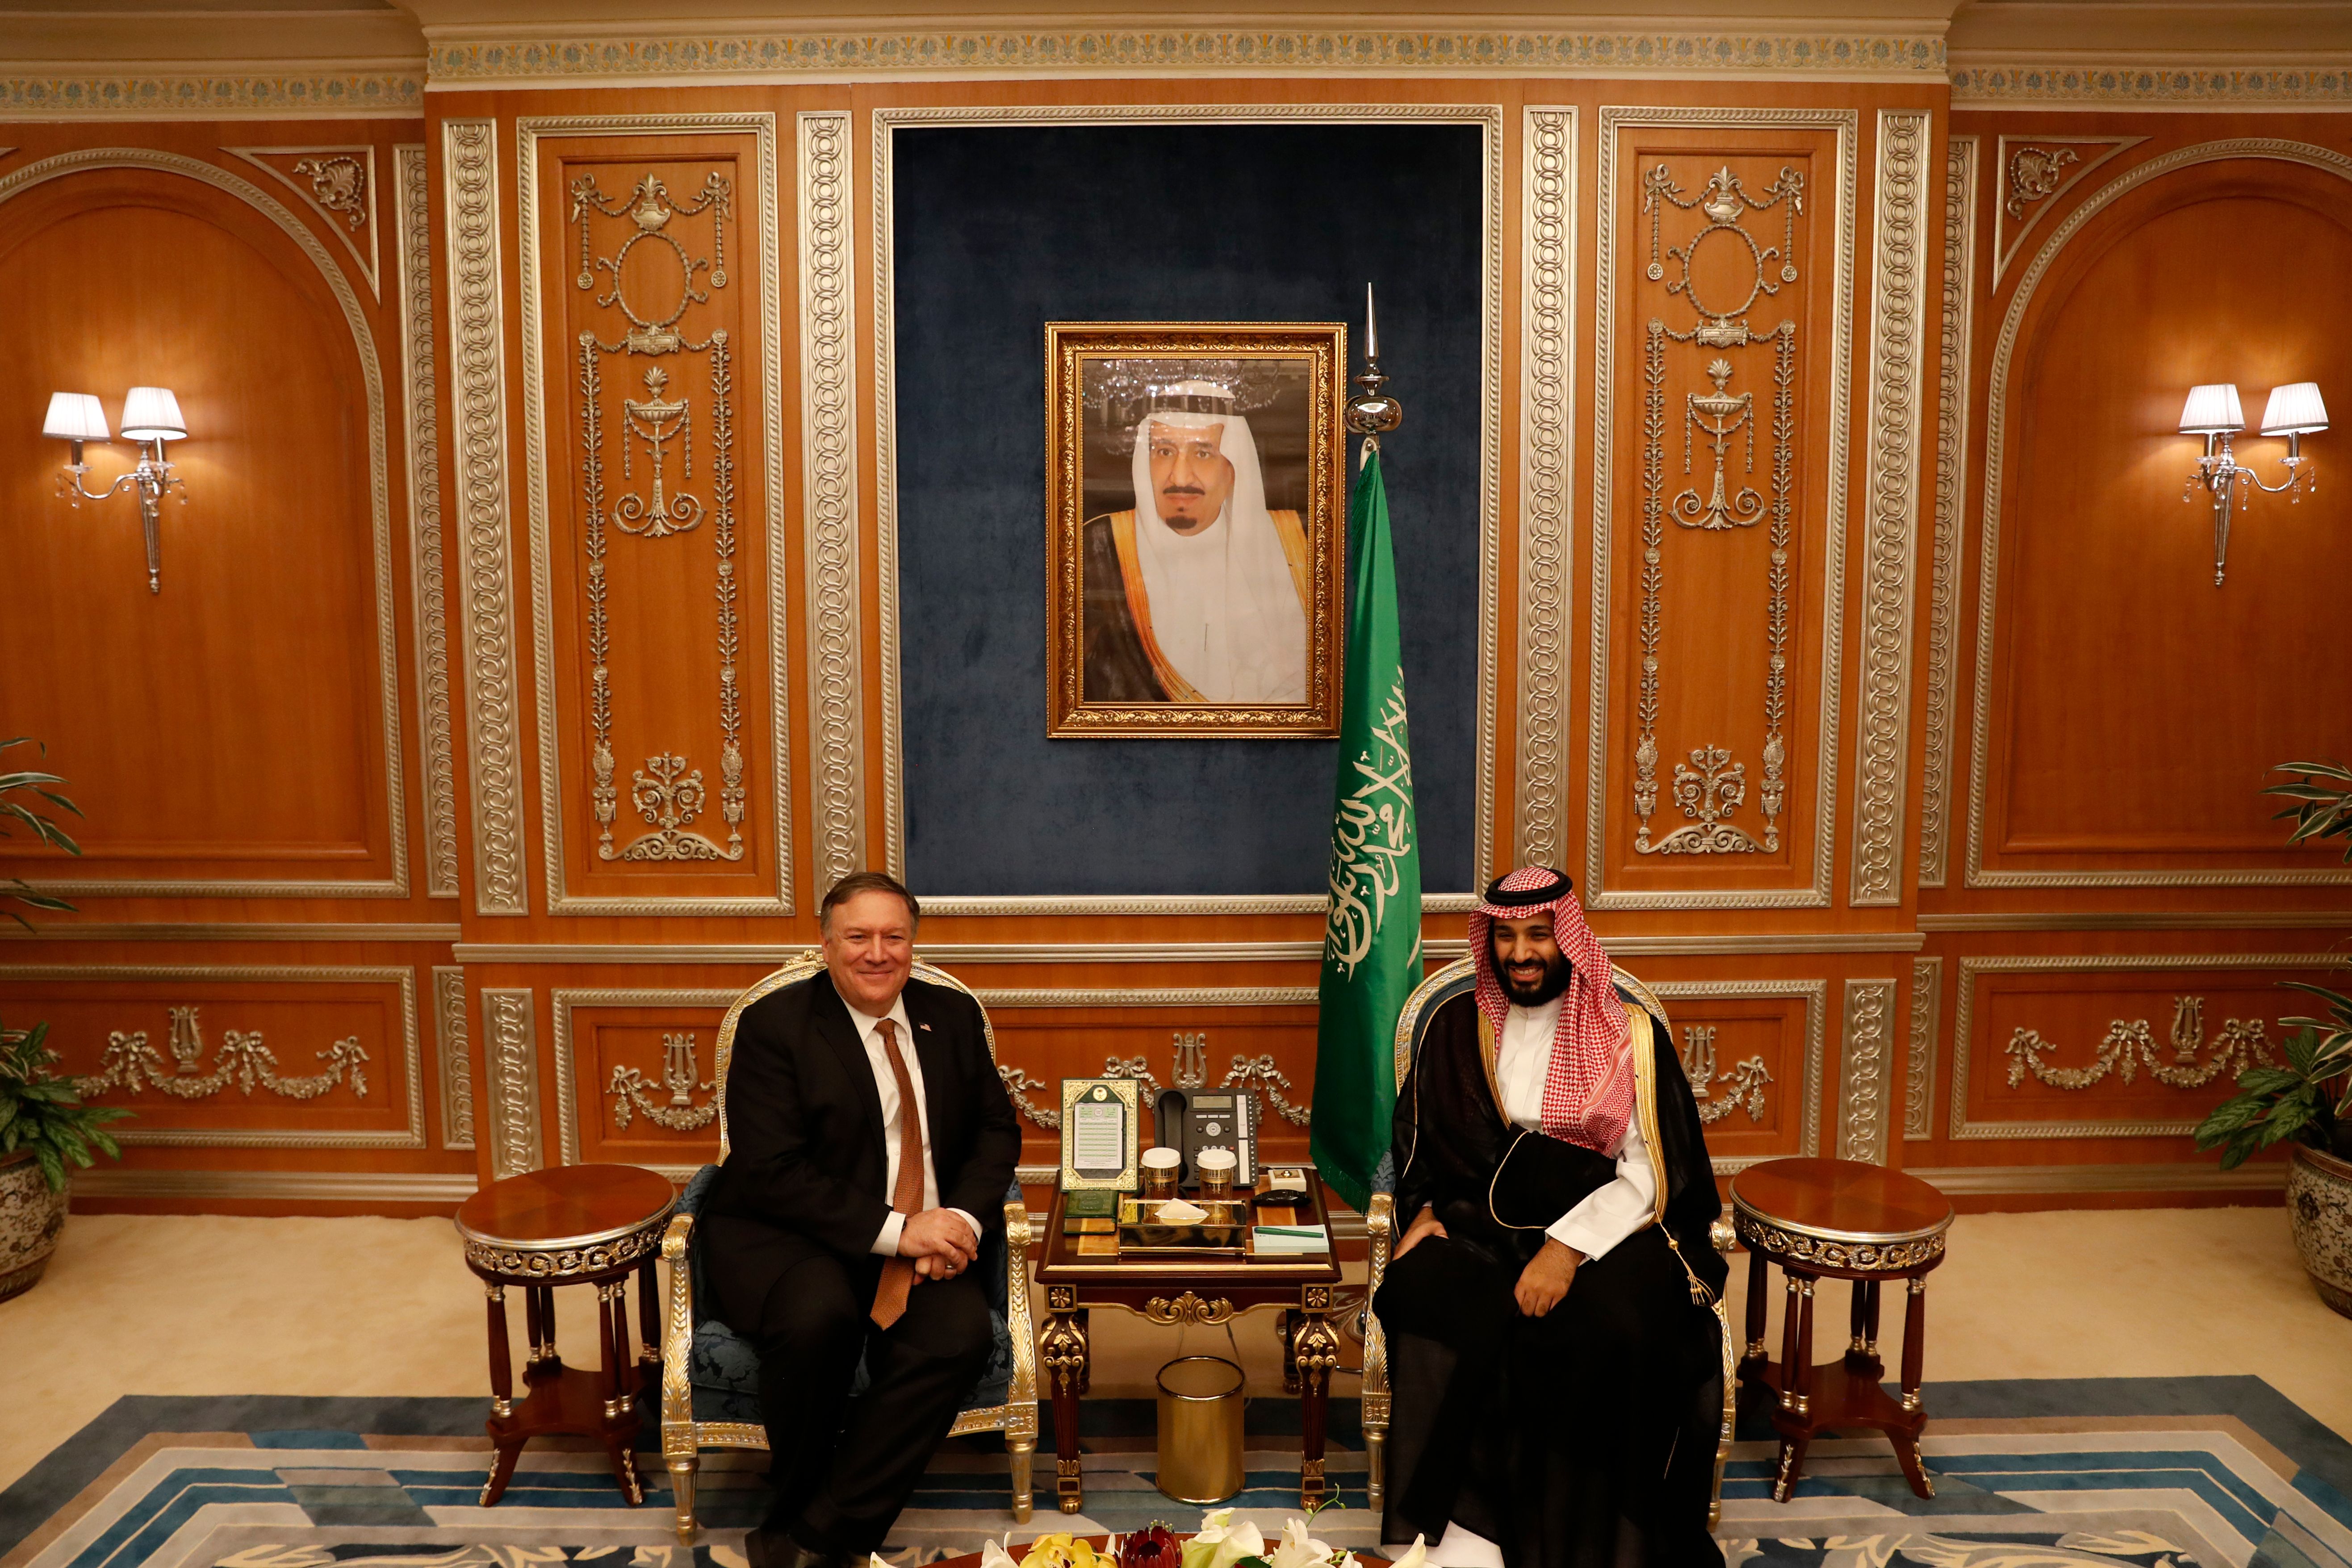 US Secretary of State Mike Pompeo (L) meets with Saudi Crown Prince Mohammed bin Salman in Riyadh, on October 16, 2018. - Pompeo held talks with Saudi King Salman seeking answers about the disappearance of journalist Jamal Khashoggi, amid US media reports the kingdom may be mulling an admission he died during a botched interrogation. (Photo by LEAH MILLIS / POOL / AFP) (Photo credit should read LEAH MILLIS/AFP/Getty Images)